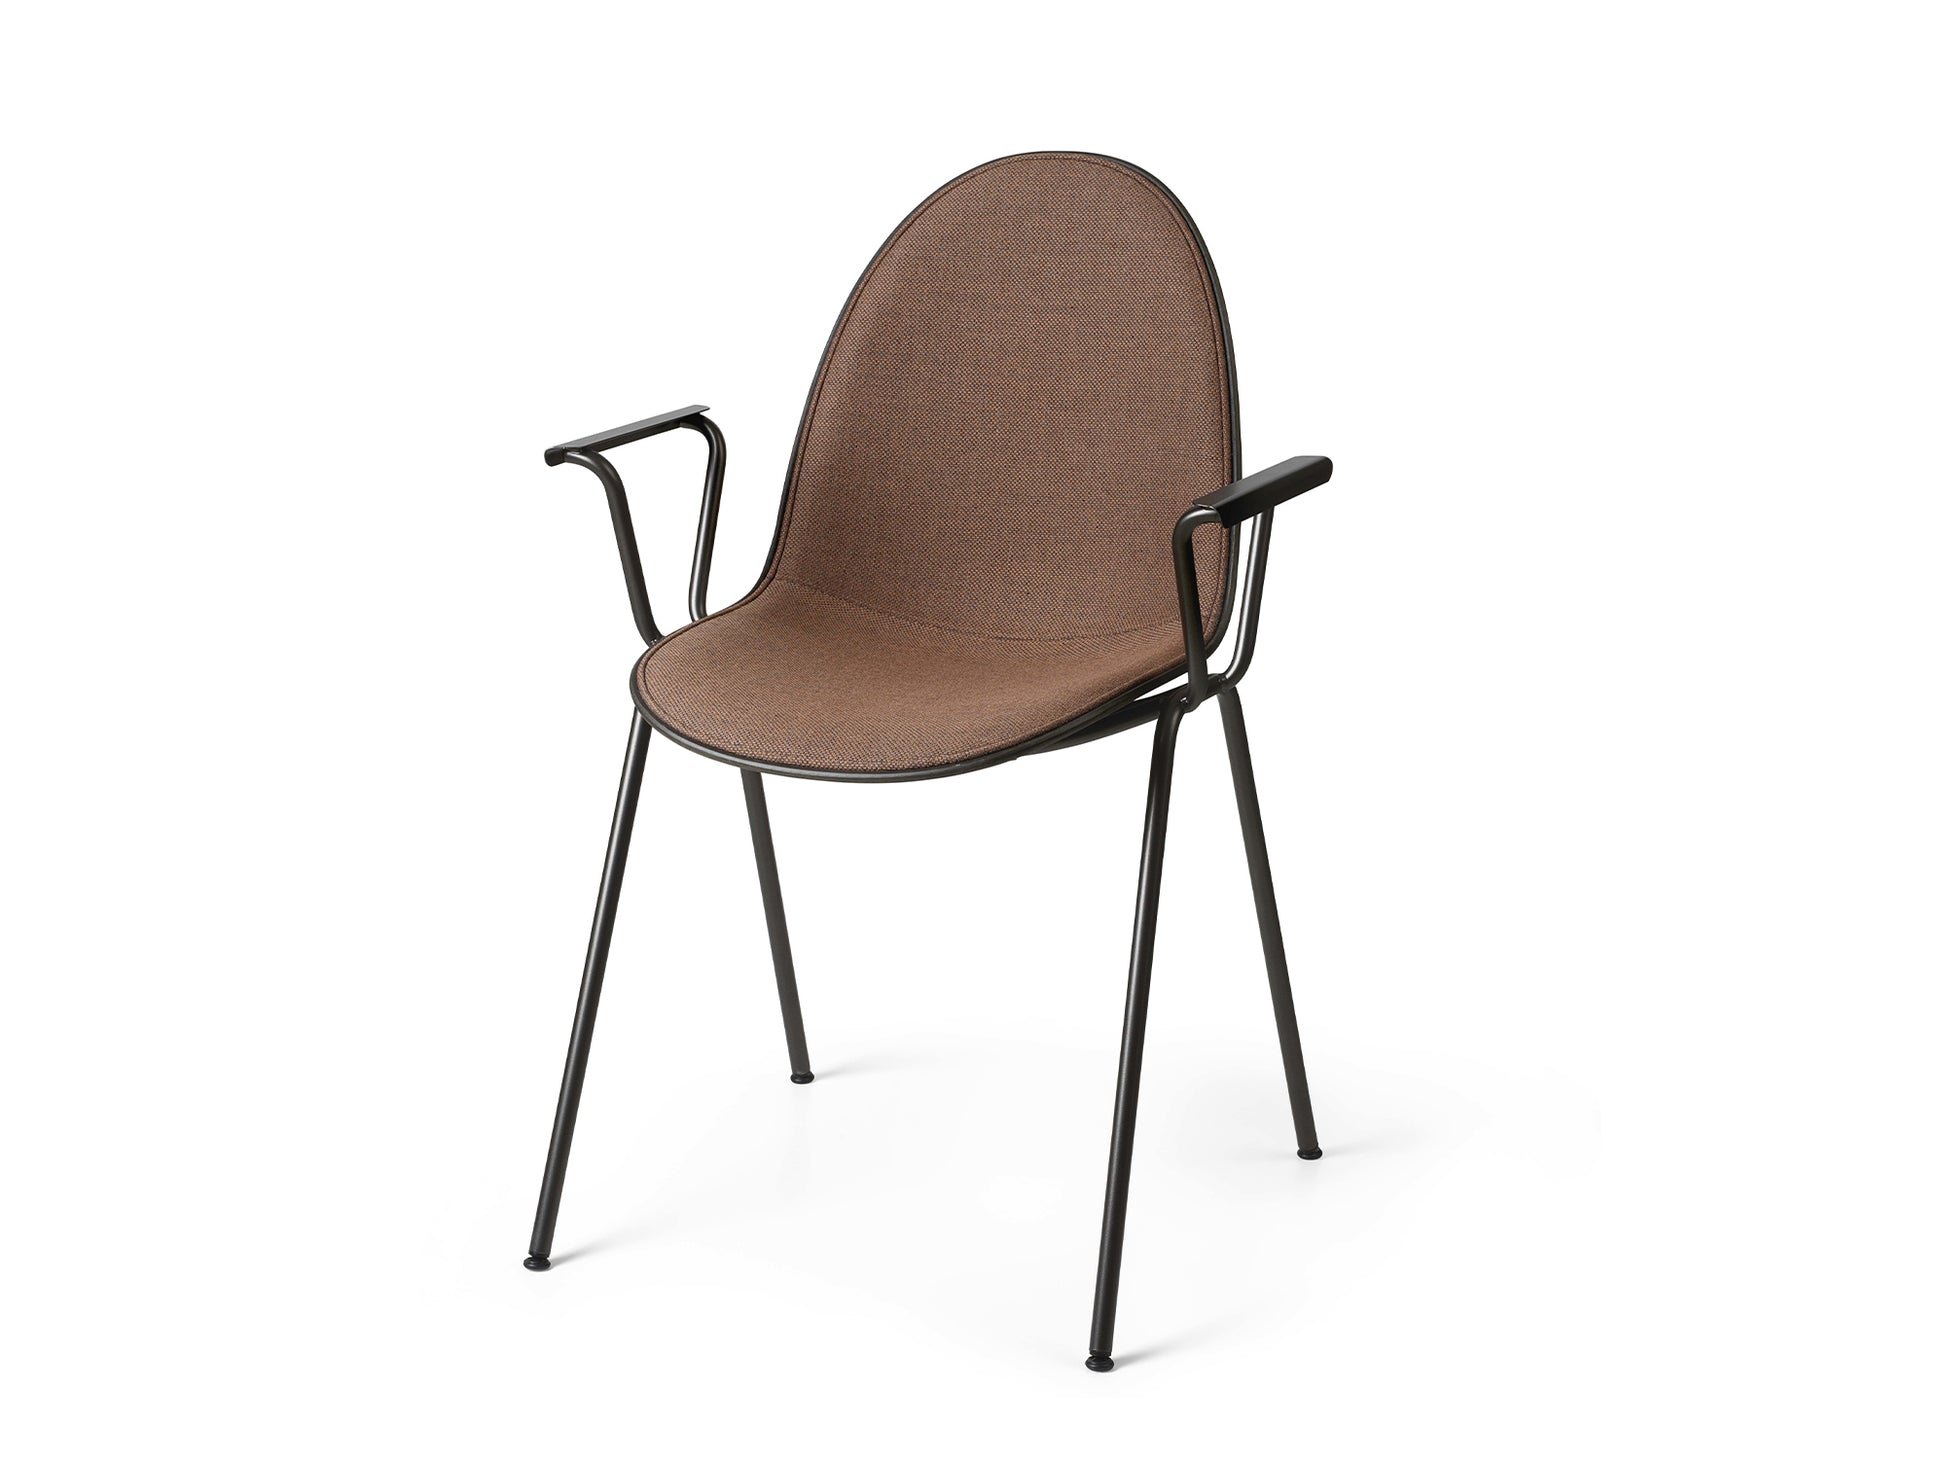 Eternity Armchair With Full Upholstery by Mater / Re-wool 378